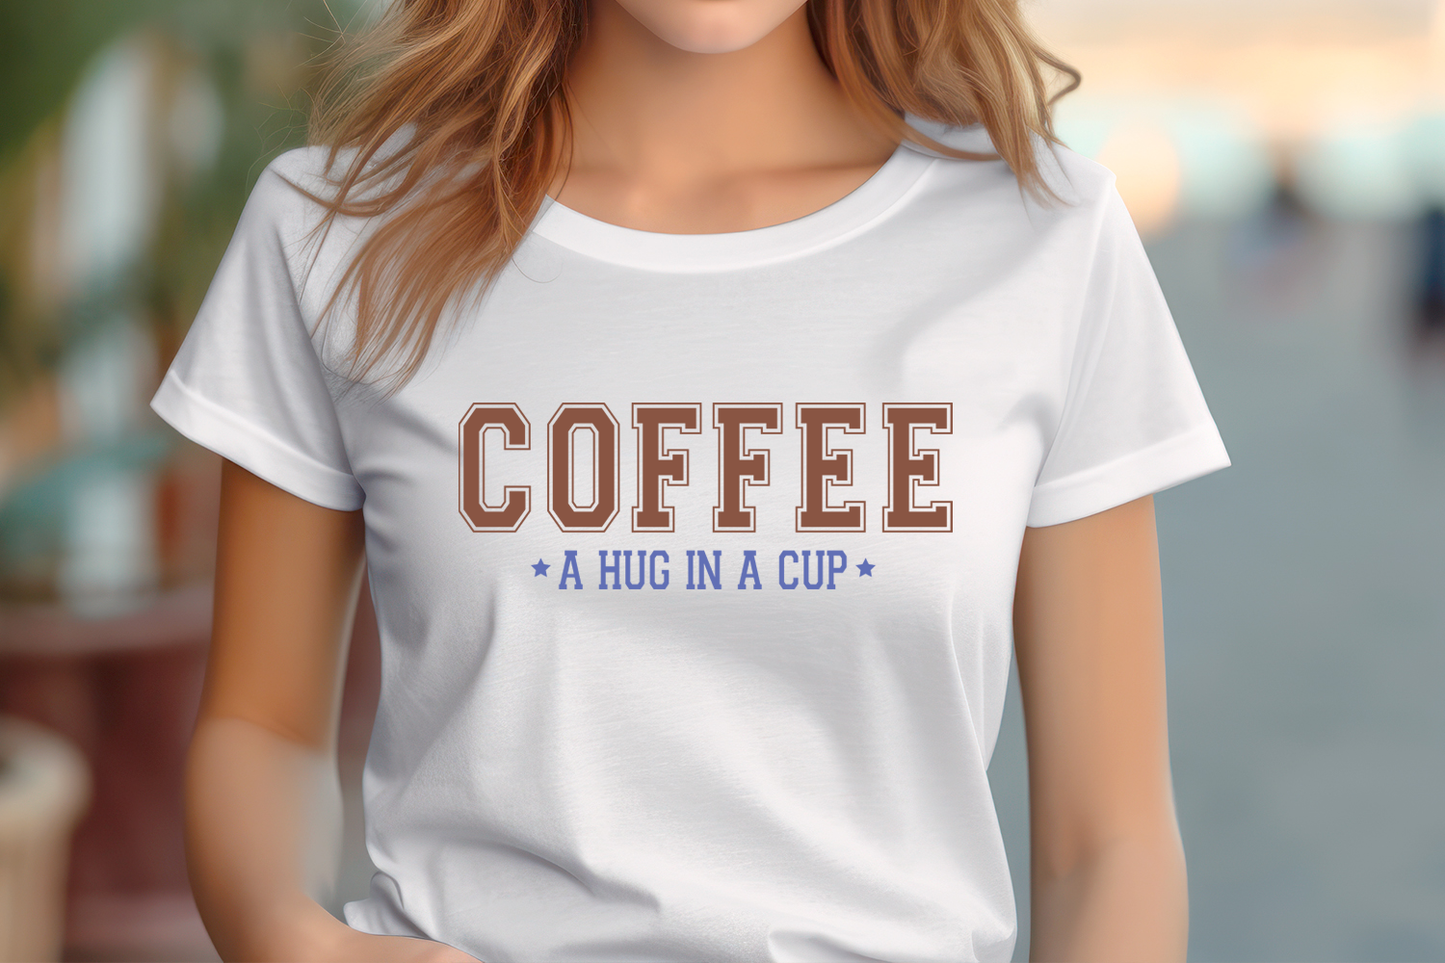 COFFEE - A HUG IN A CUP